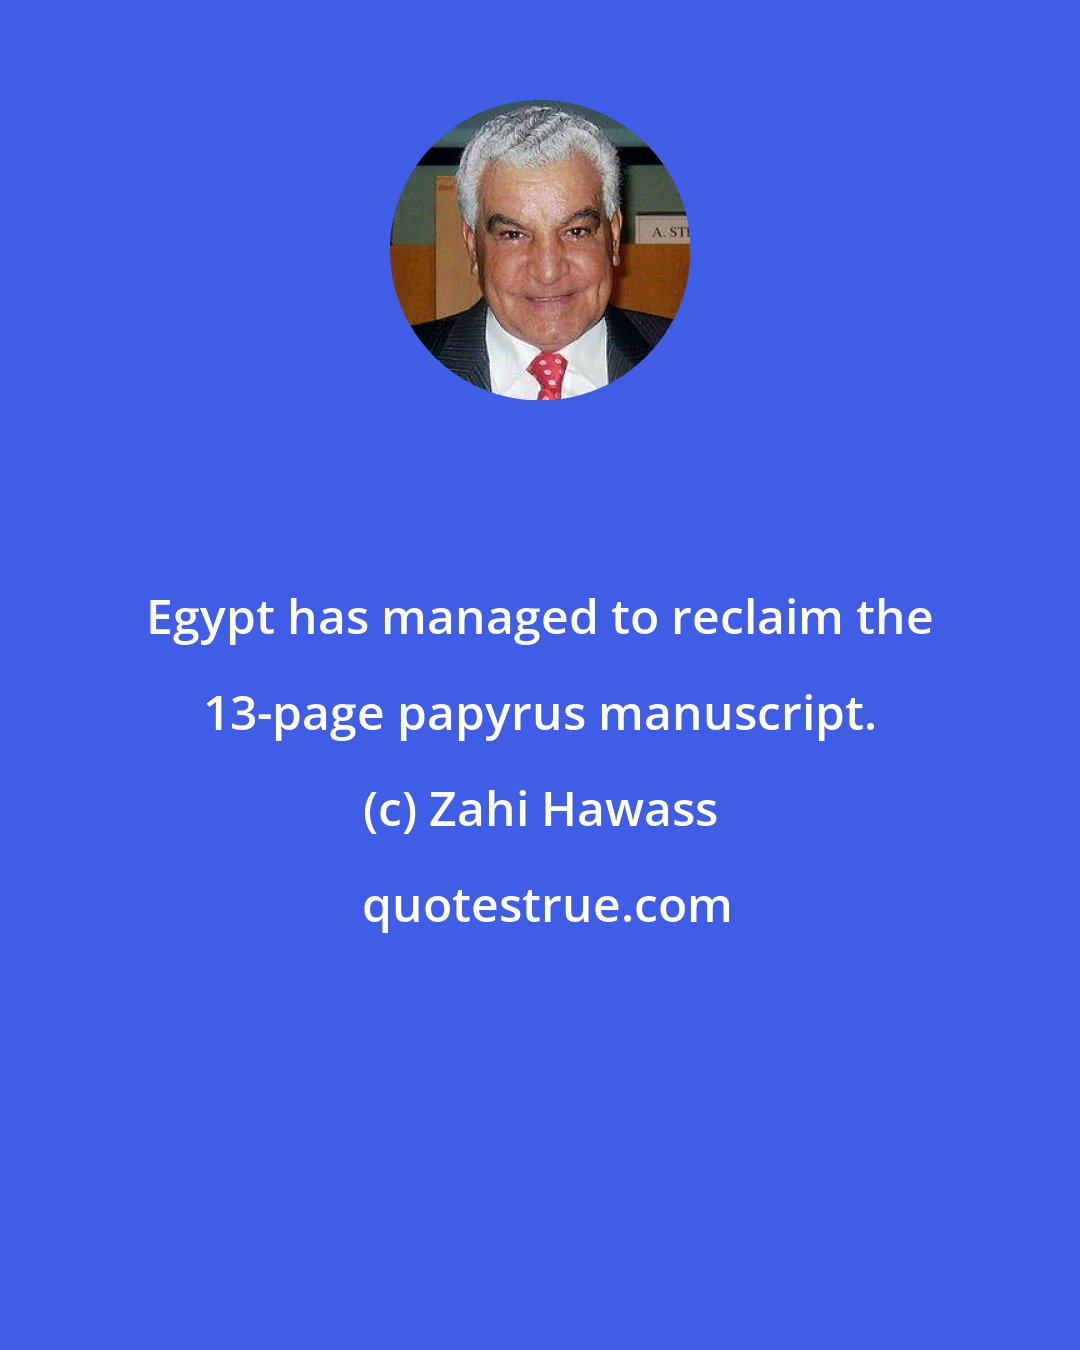 Zahi Hawass: Egypt has managed to reclaim the 13-page papyrus manuscript.